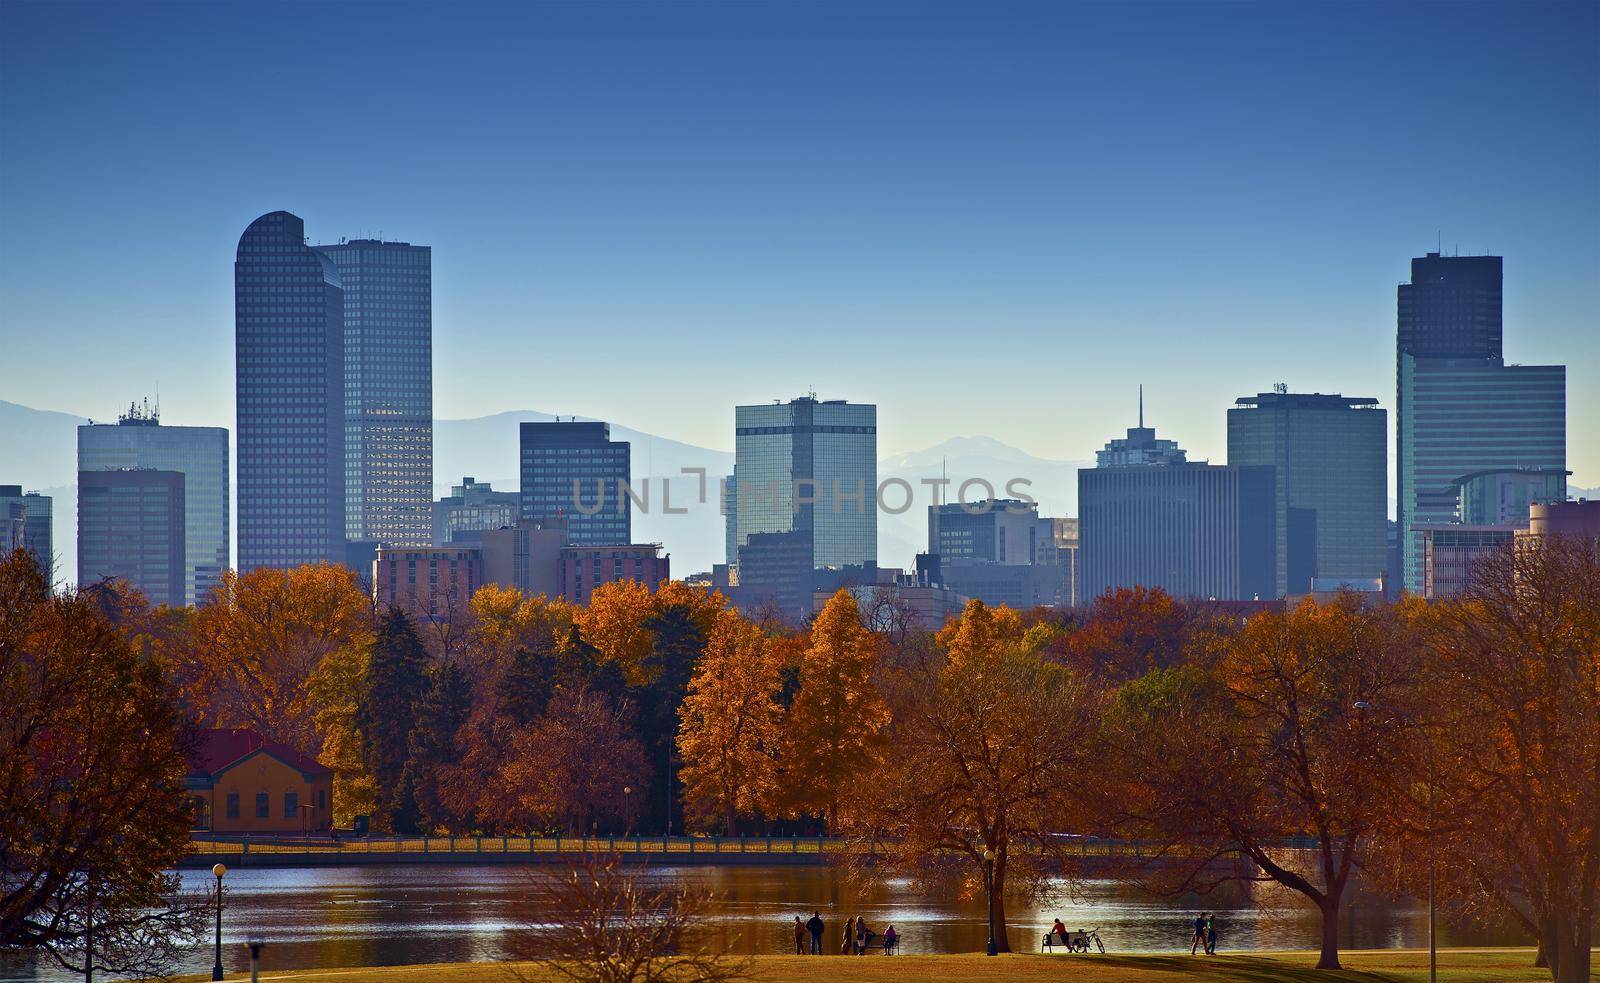 City of Denver Skyline. City Park Landscape. Capital of the U.S. State of Colorado. American Cities Photo Collection. by welcomia